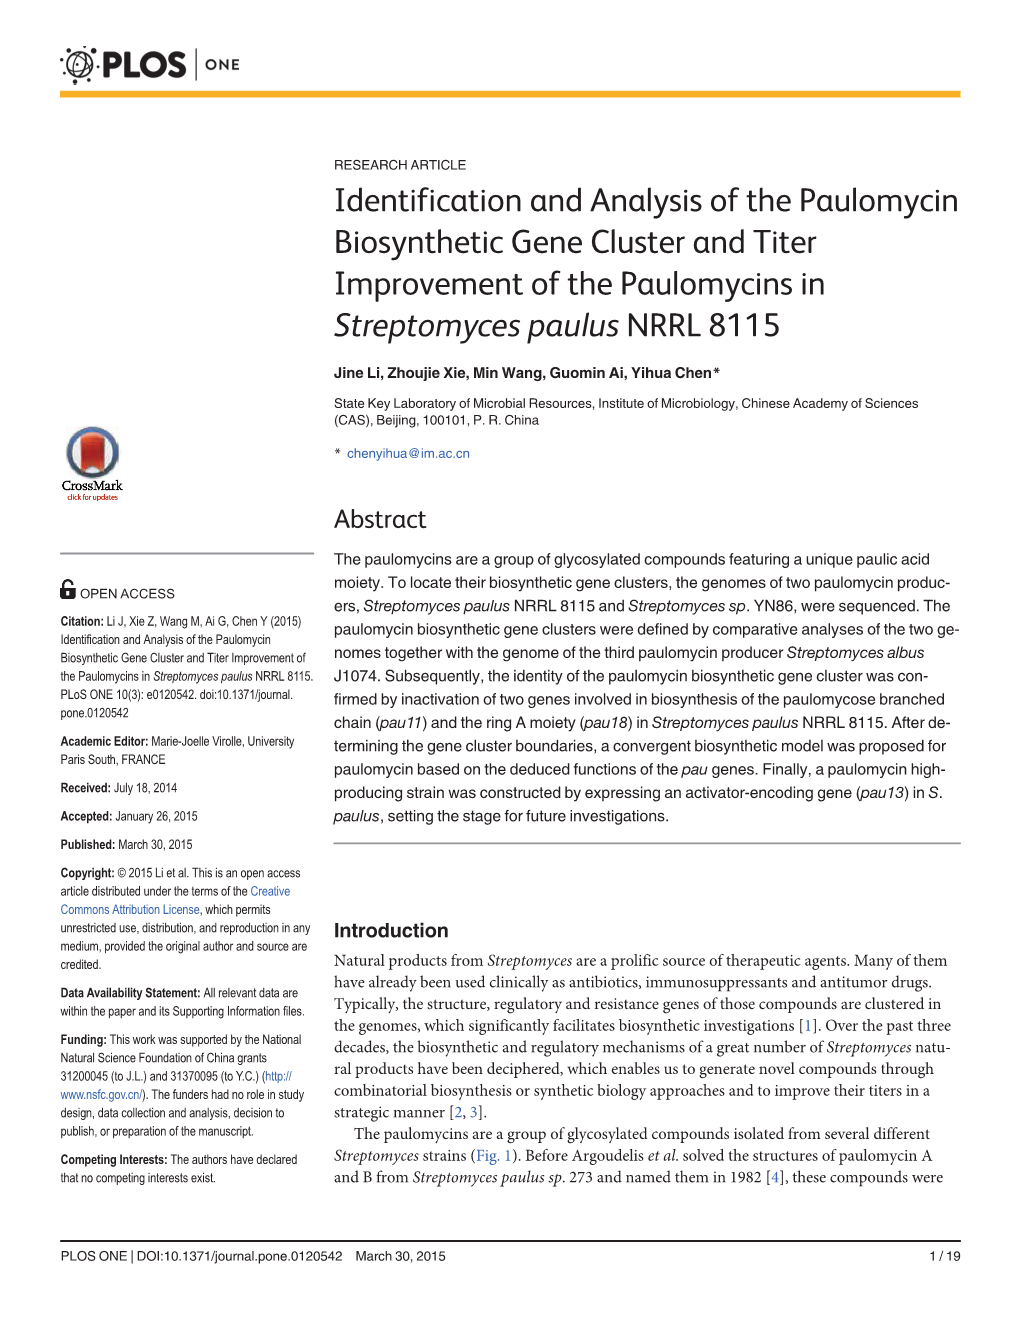 Identification and Analysis of the Paulomycin Biosynthetic Gene Cluster and Titer Improvement of the Paulomycins in Streptomyces Paulus NRRL 8115